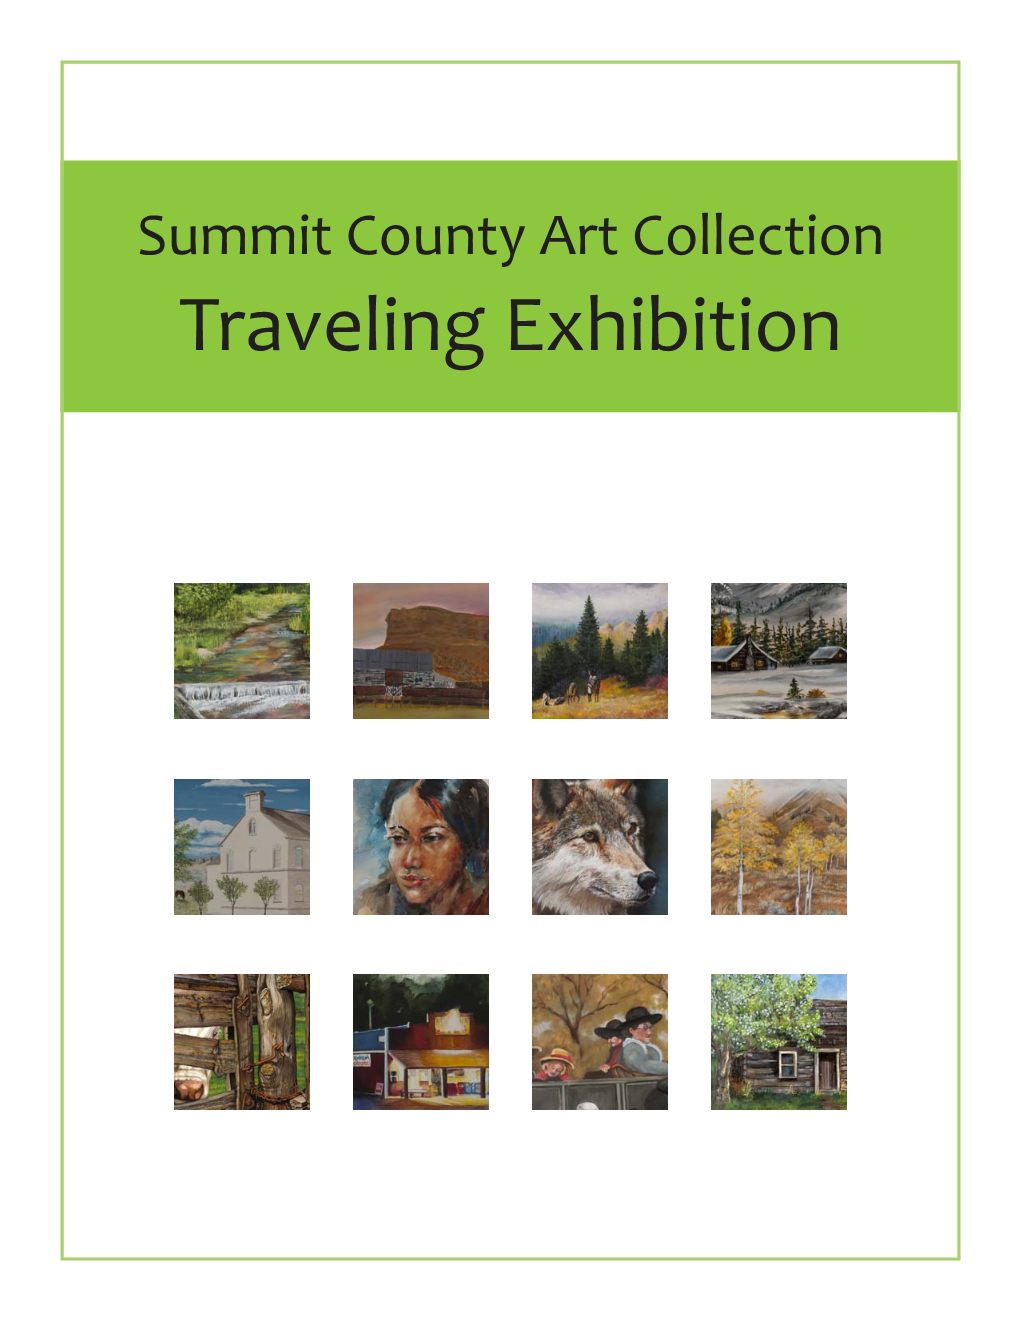 Summit County Art Collection Traveling Exhibition